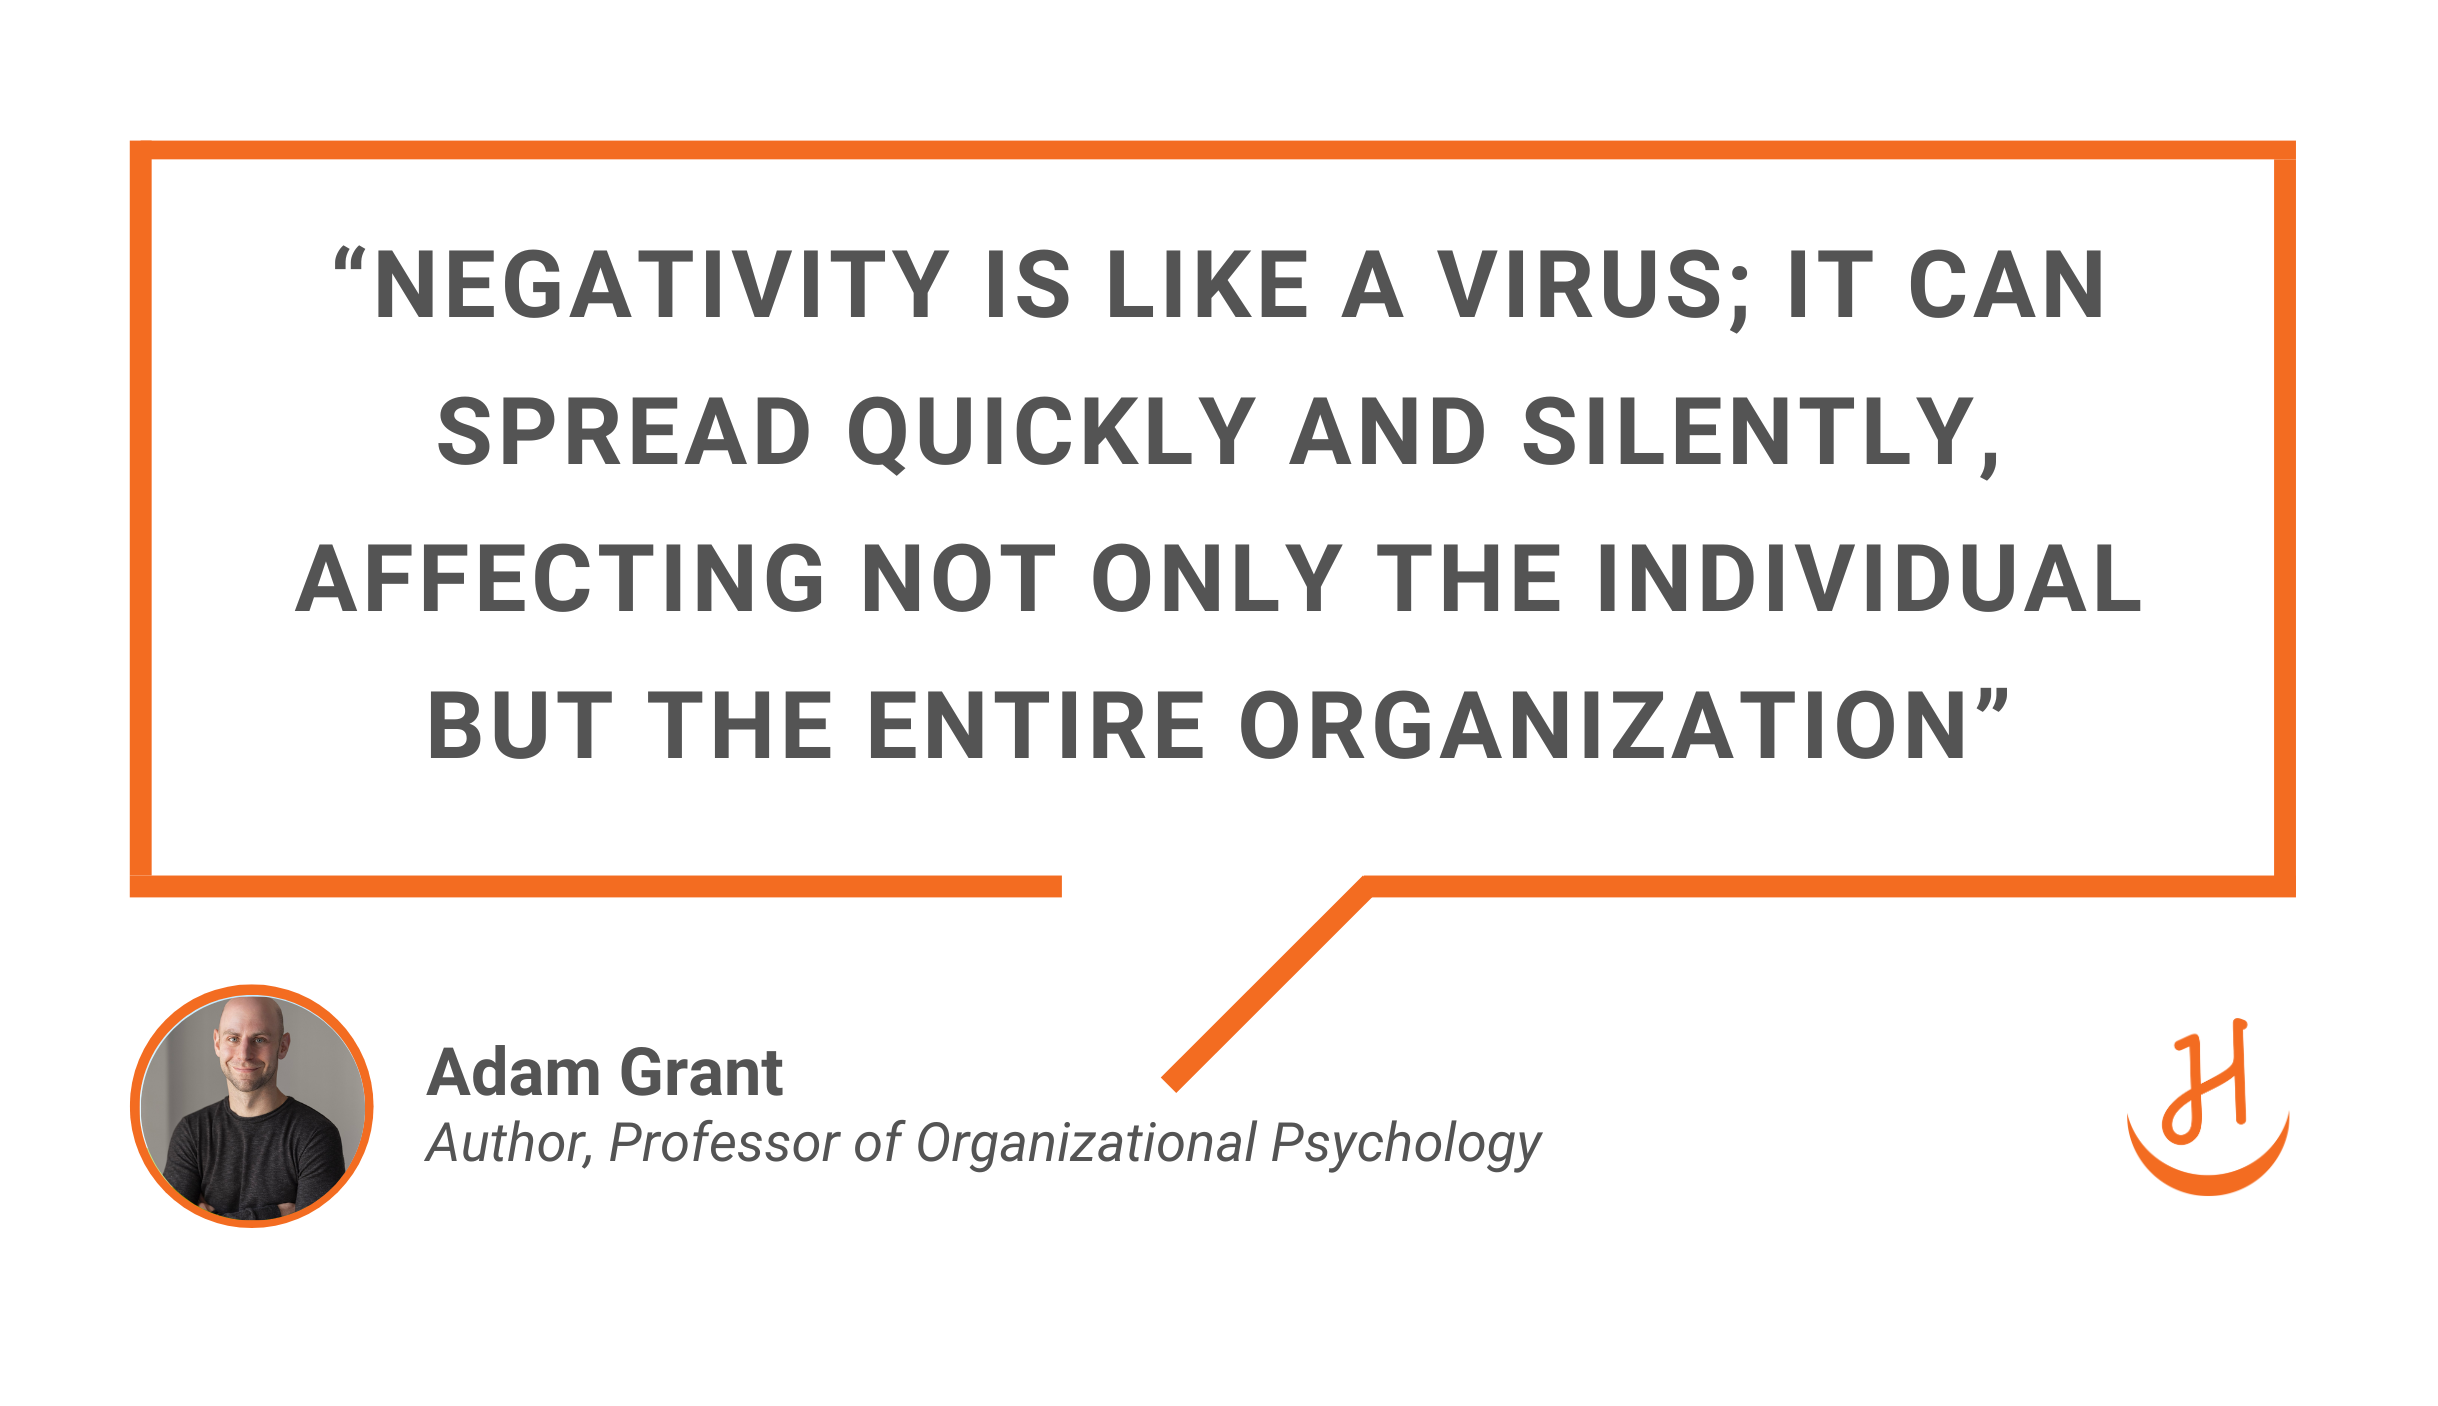 Quote by Adam Grant, "Negativity is like a virus; it can spread quickly and silently, affecting not only the individual but the entire organization"